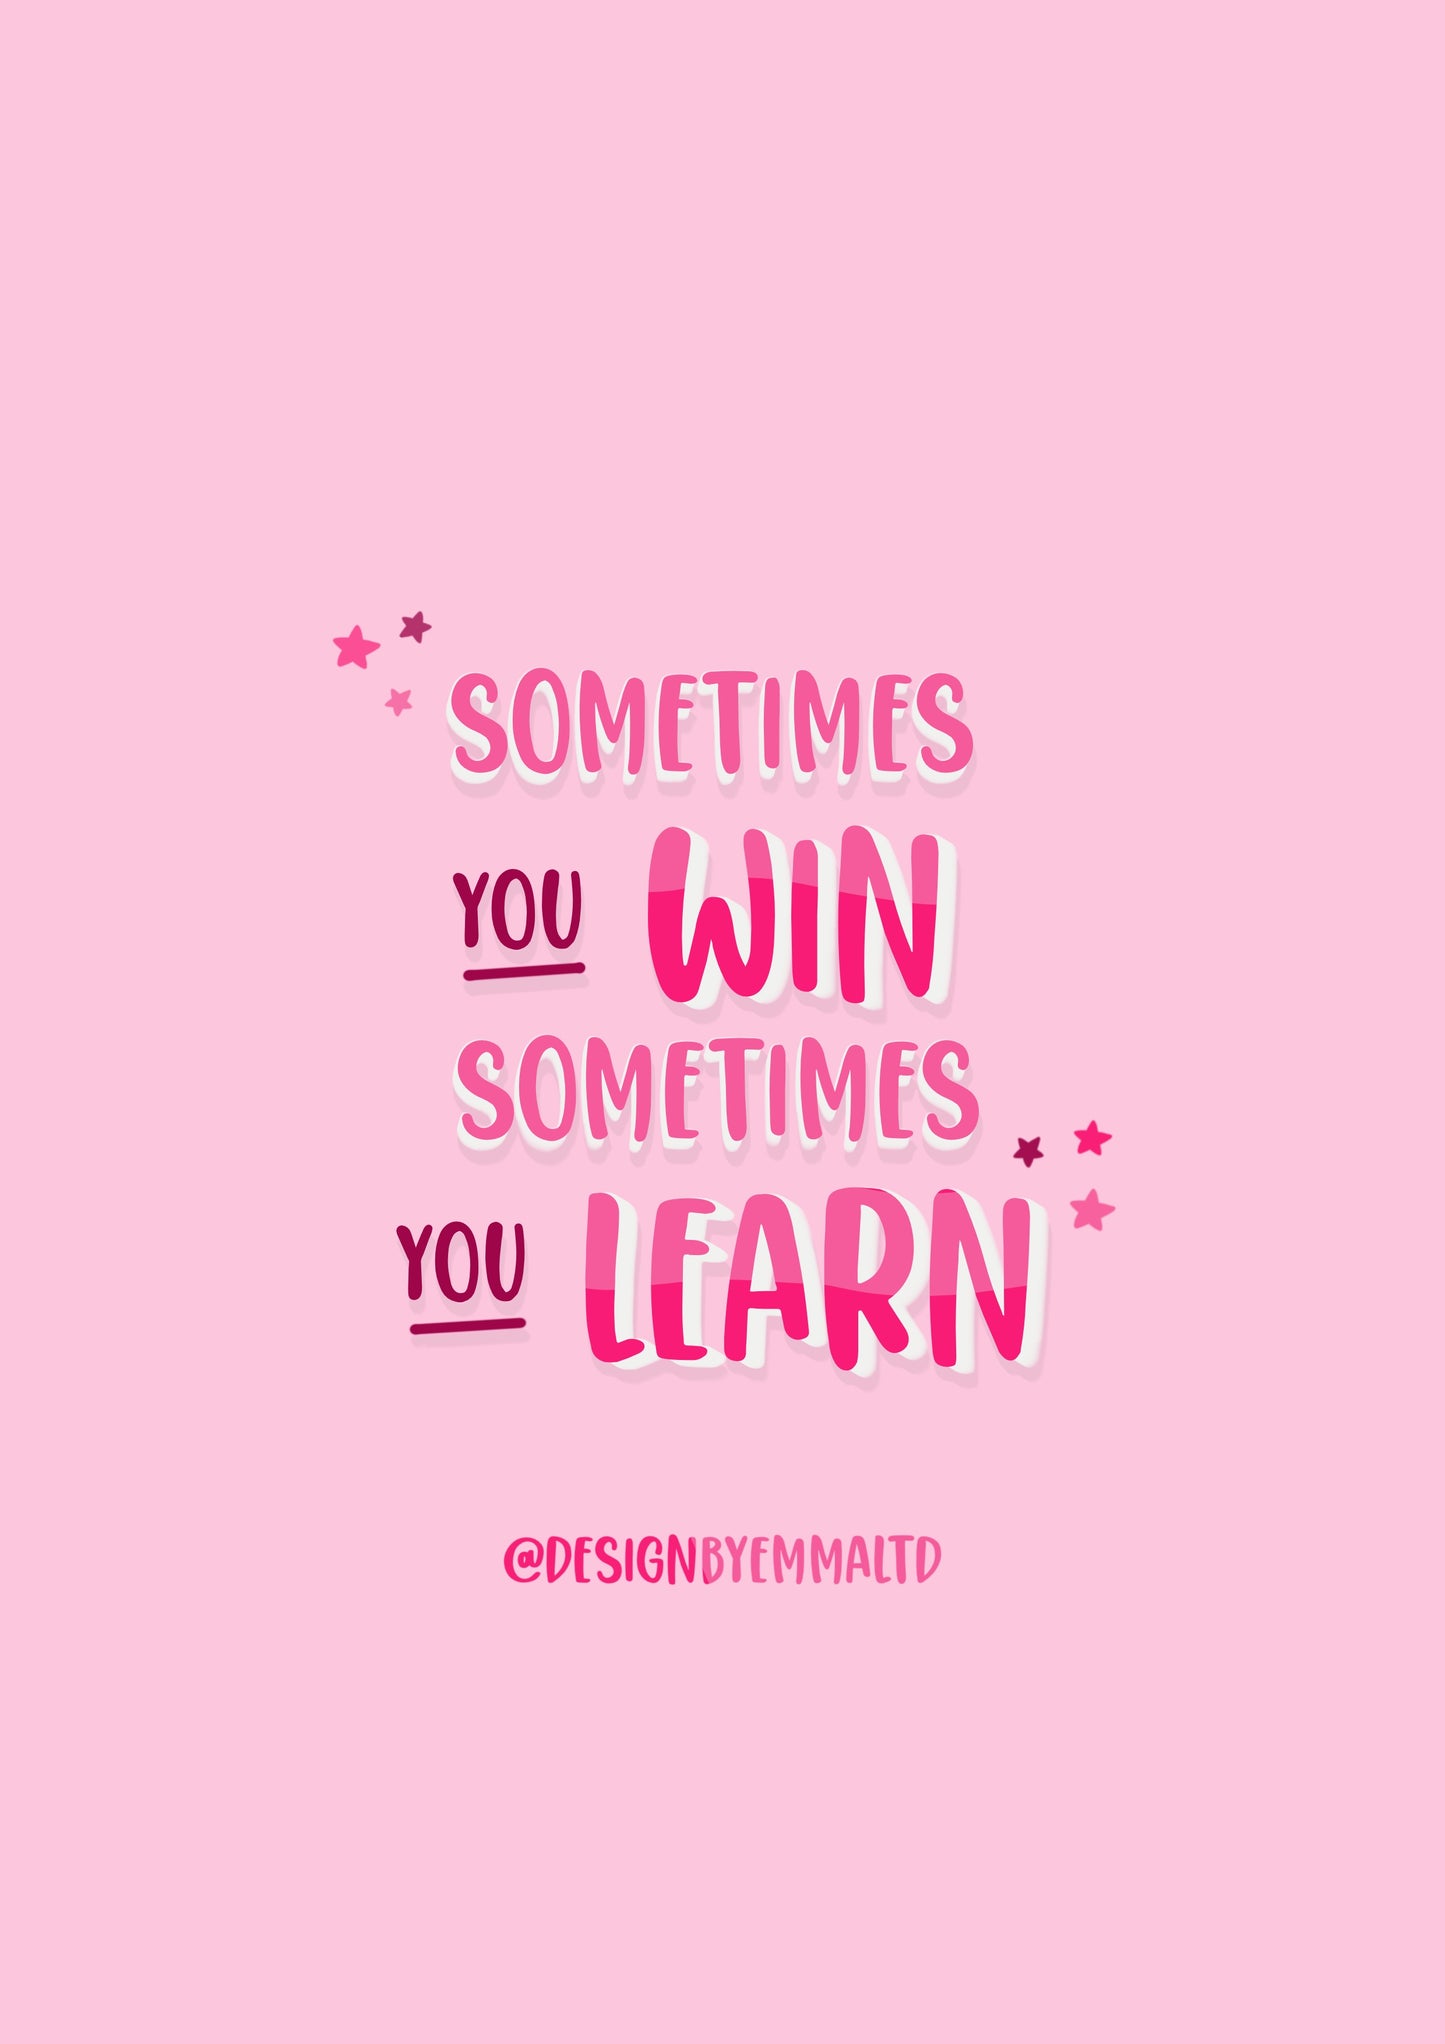 Sometimes You Win, Sometimes You Learn, Motivational Quote Poster, Inspirational Wall Art, Postcard